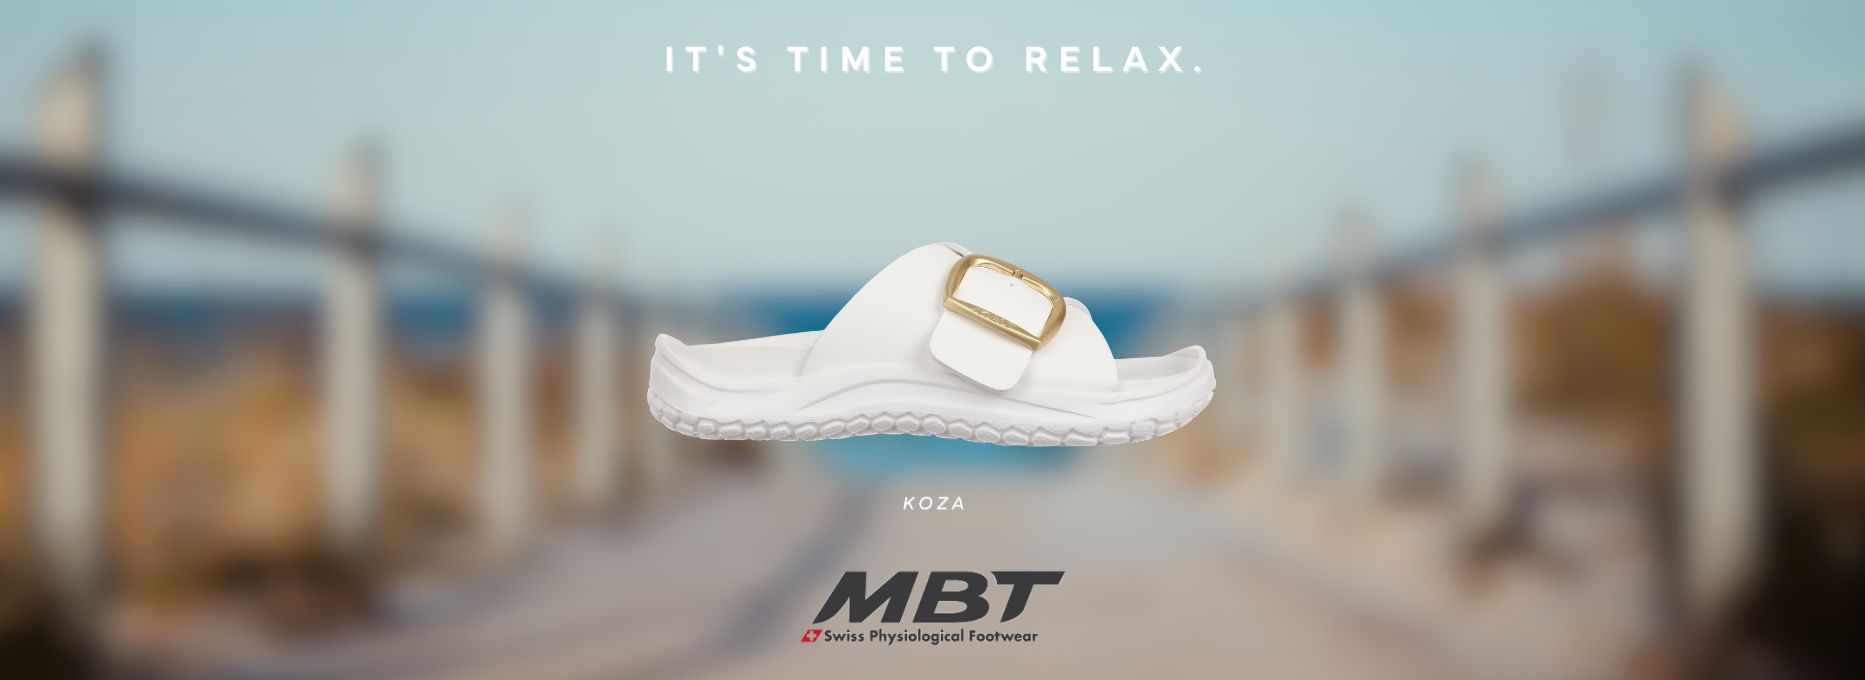 Relax in Comfort with New Koza Sandals!